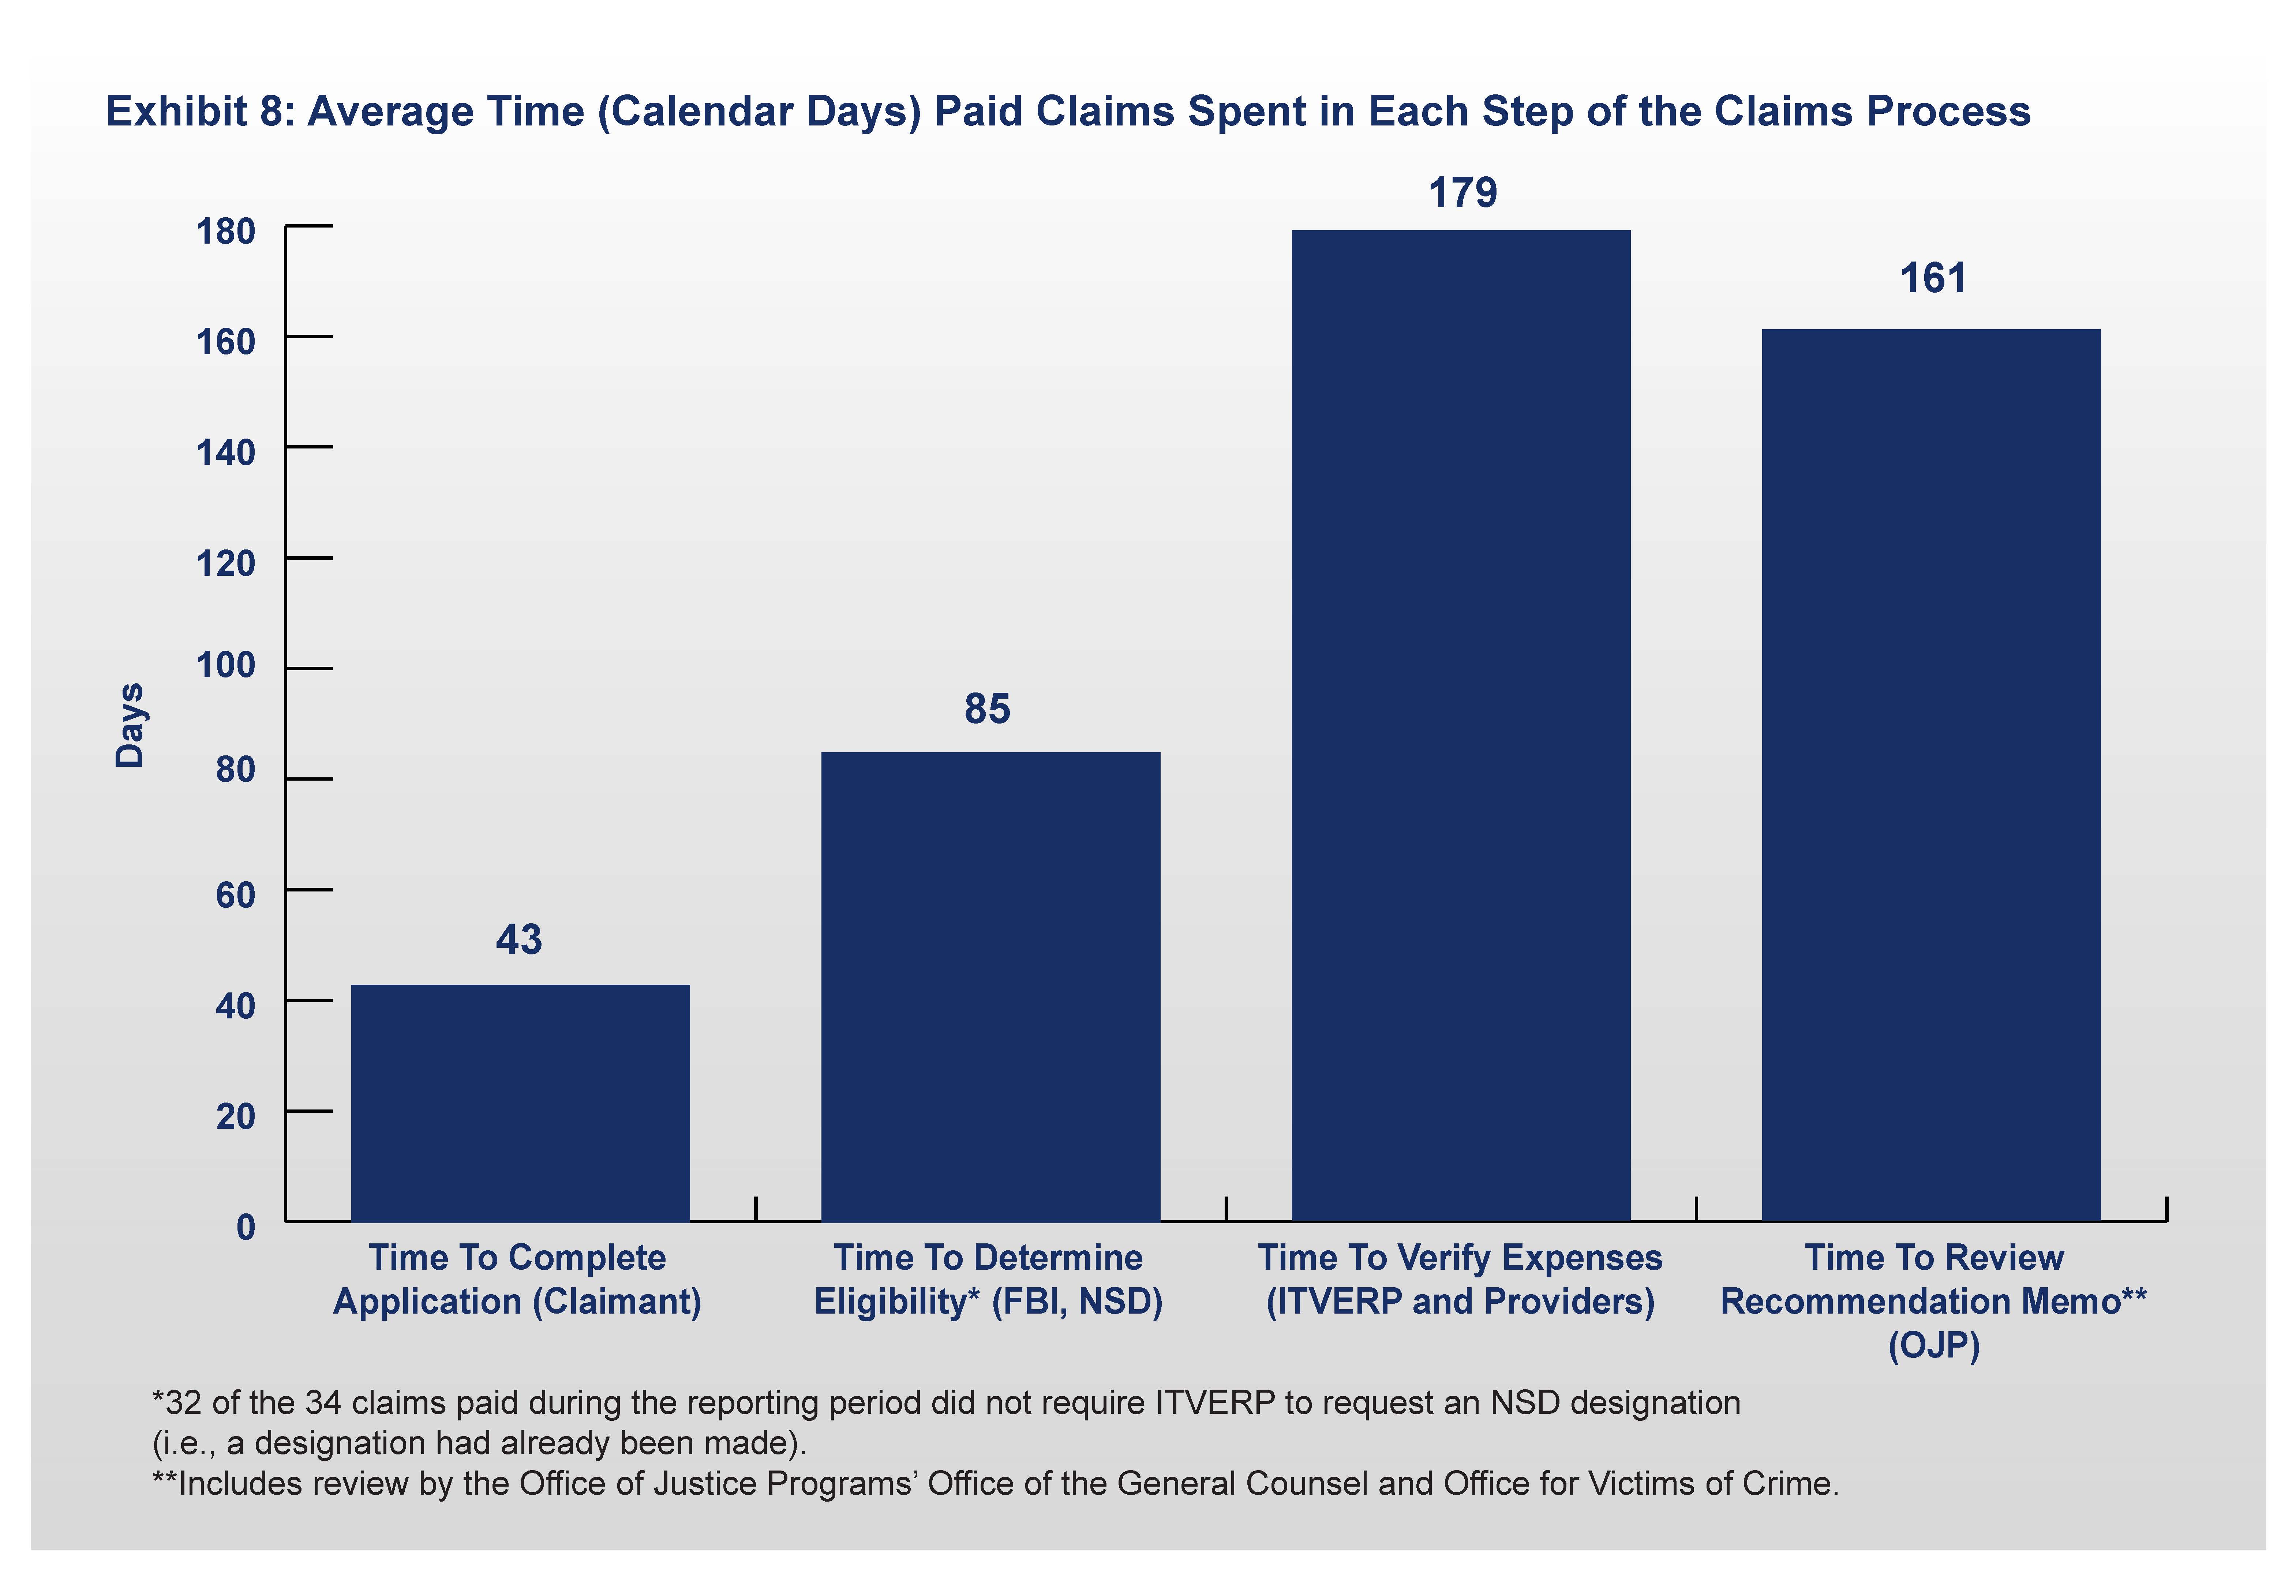 Exhibit 8: Average Time Paid Claims Spent in Each Step of the Claims Process